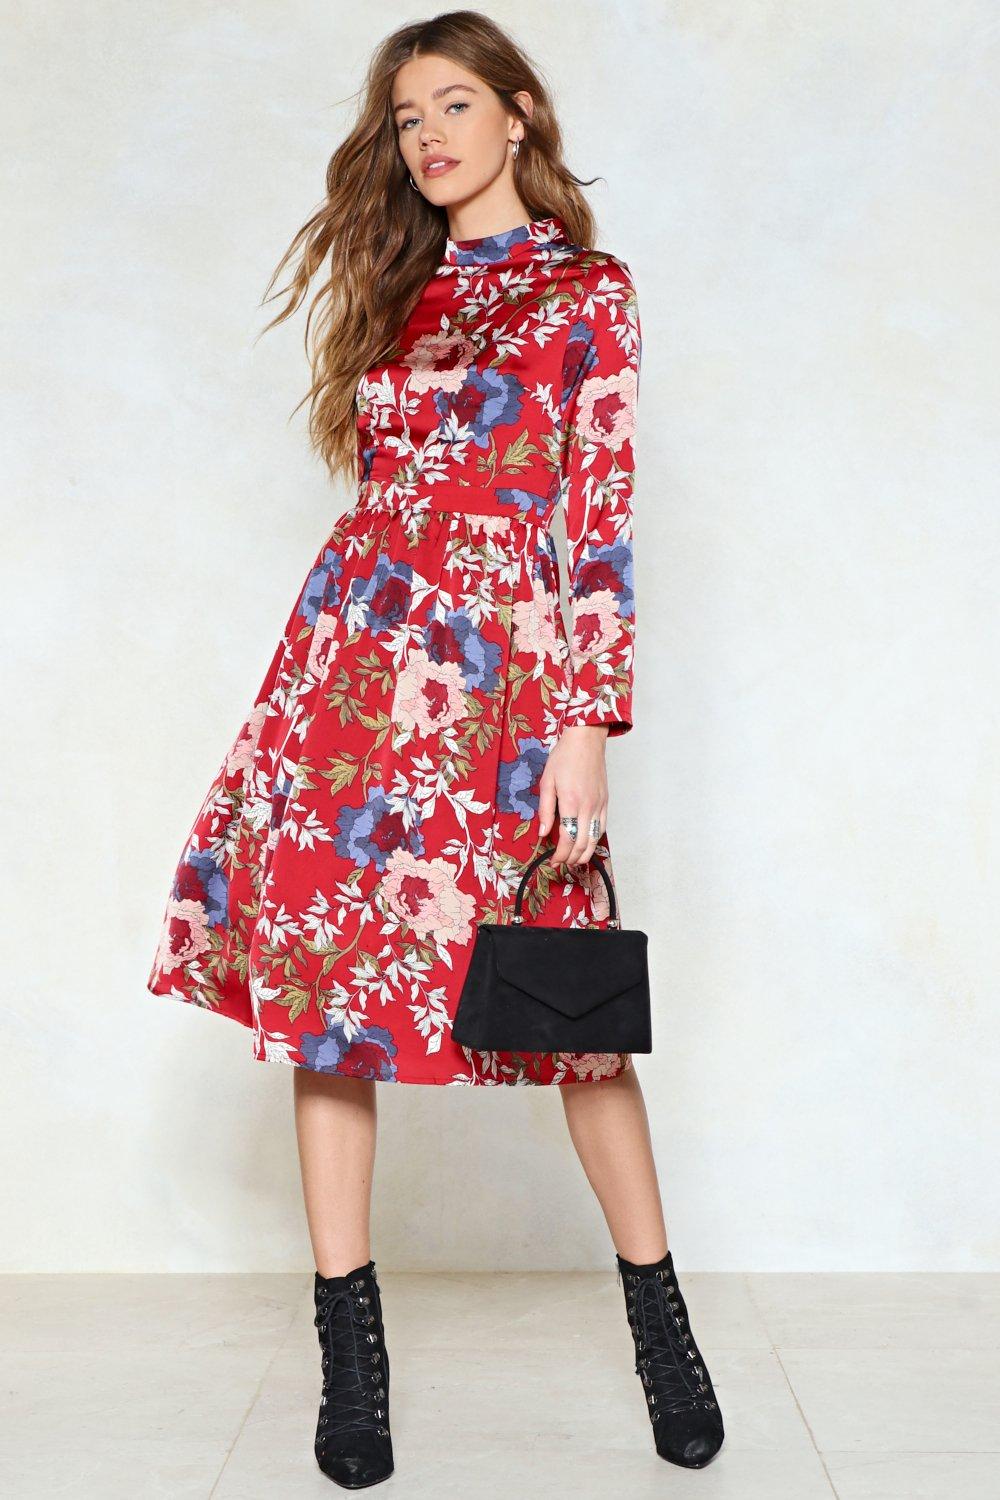 Garden Party Floral Dress | Nasty Gal